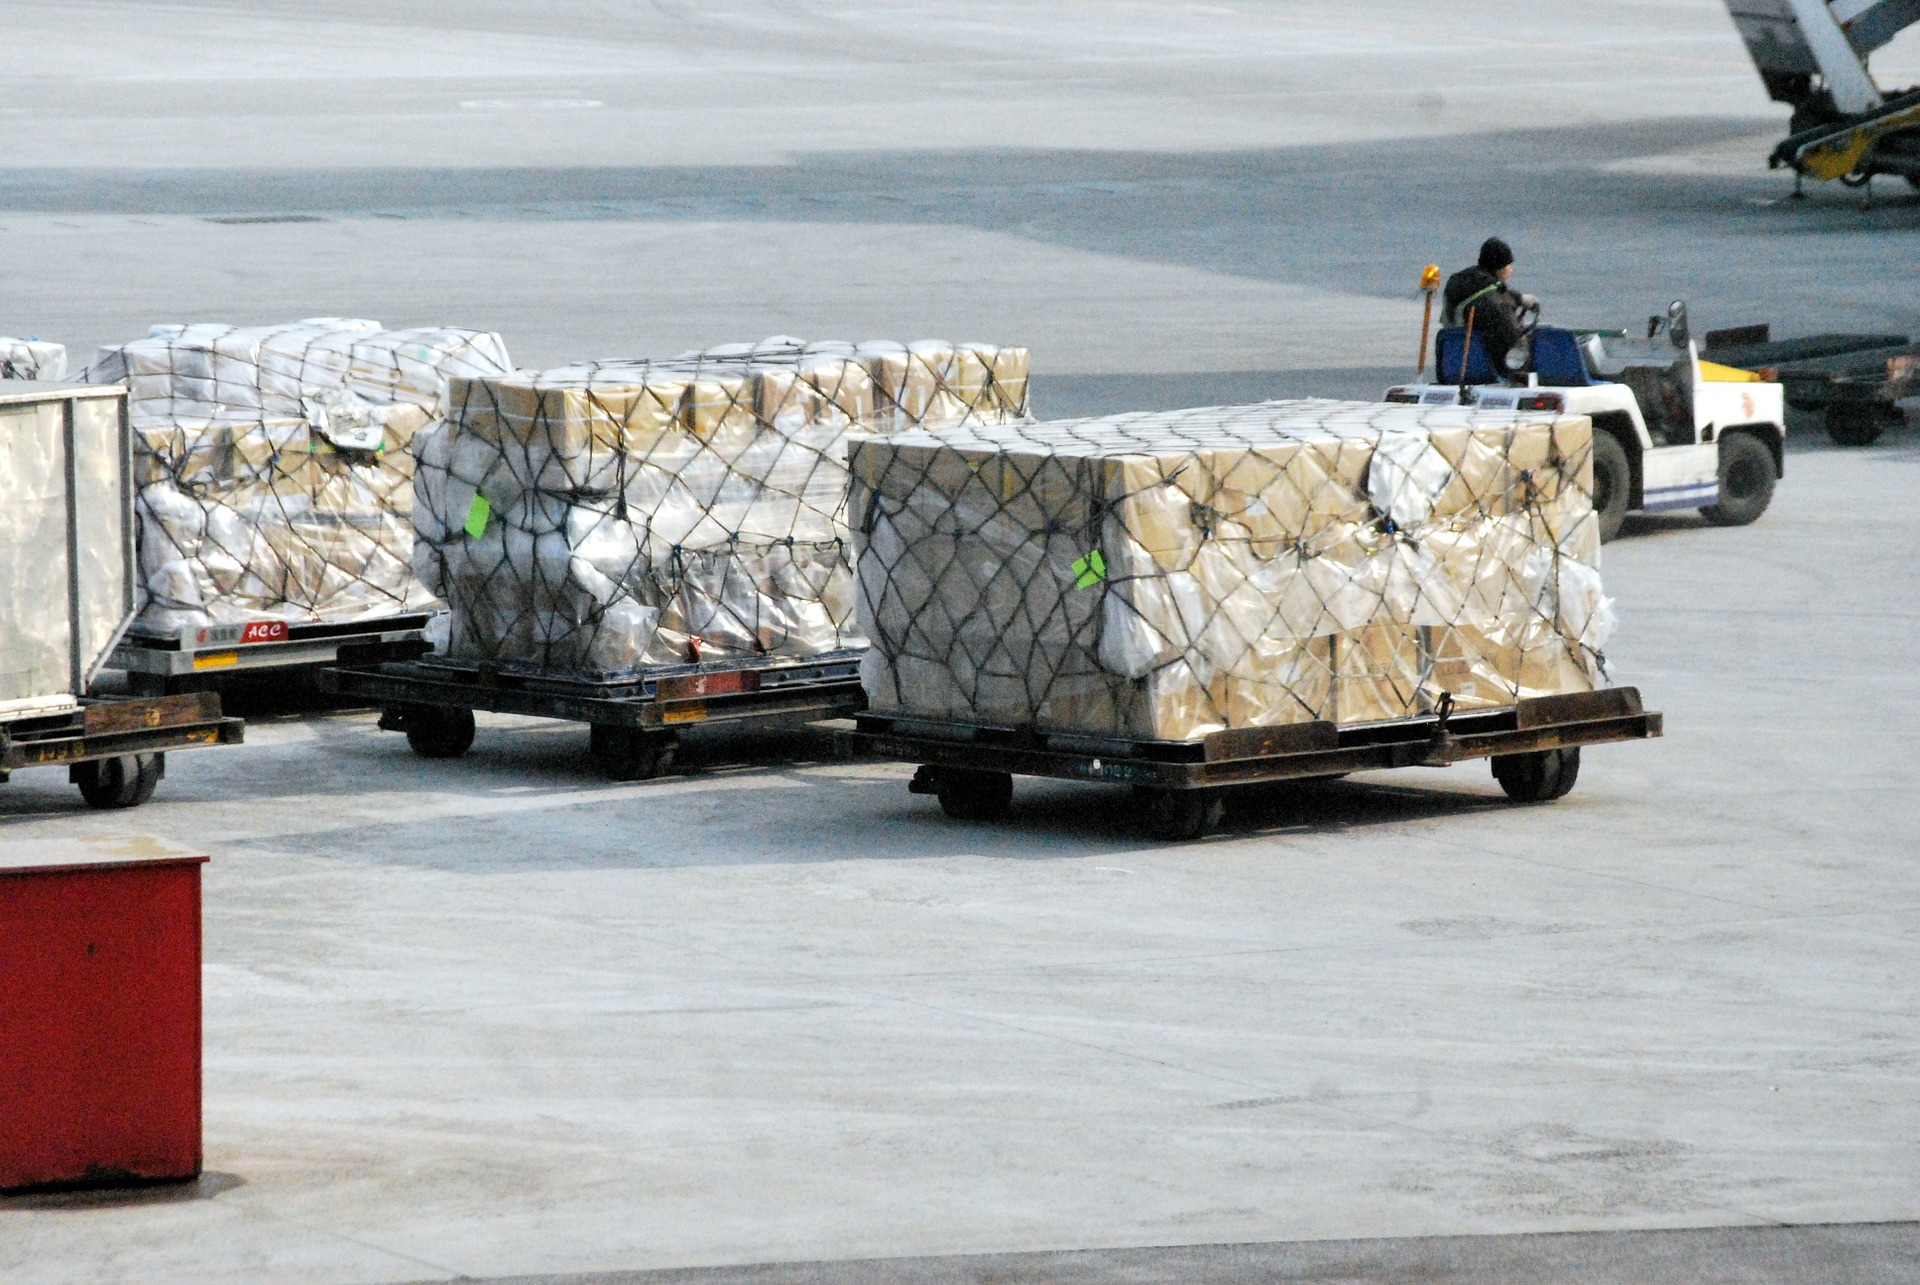 The current state of the air cargo industry